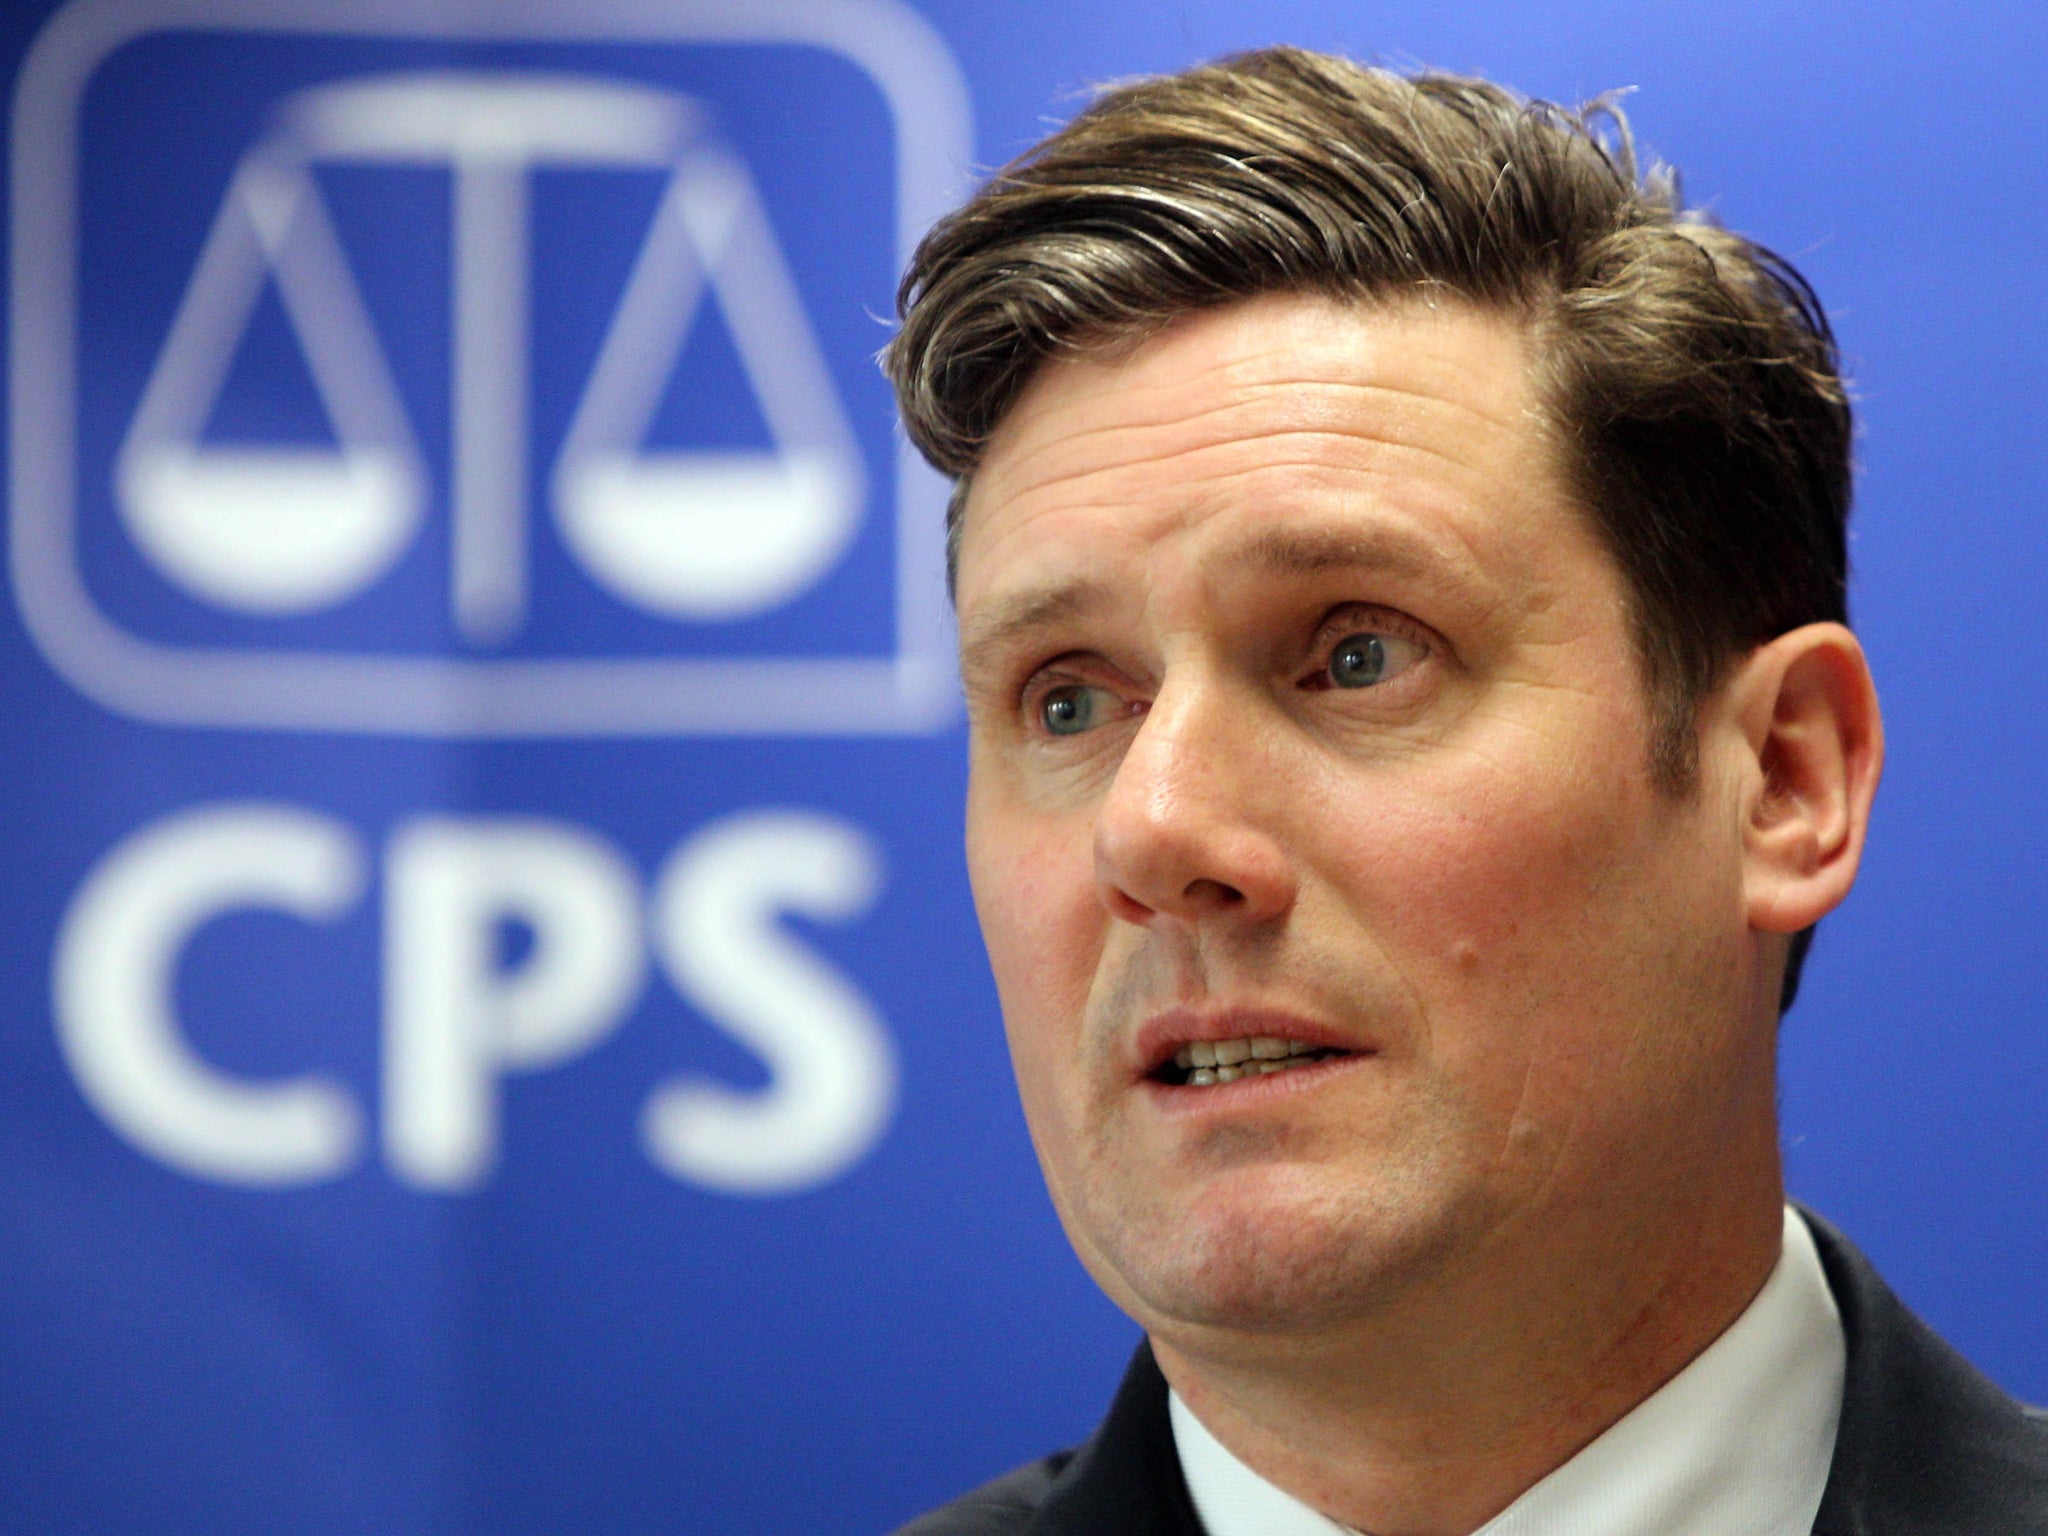 Director of Public Prosecutions claims victims have historically been treated as 'bystanders'